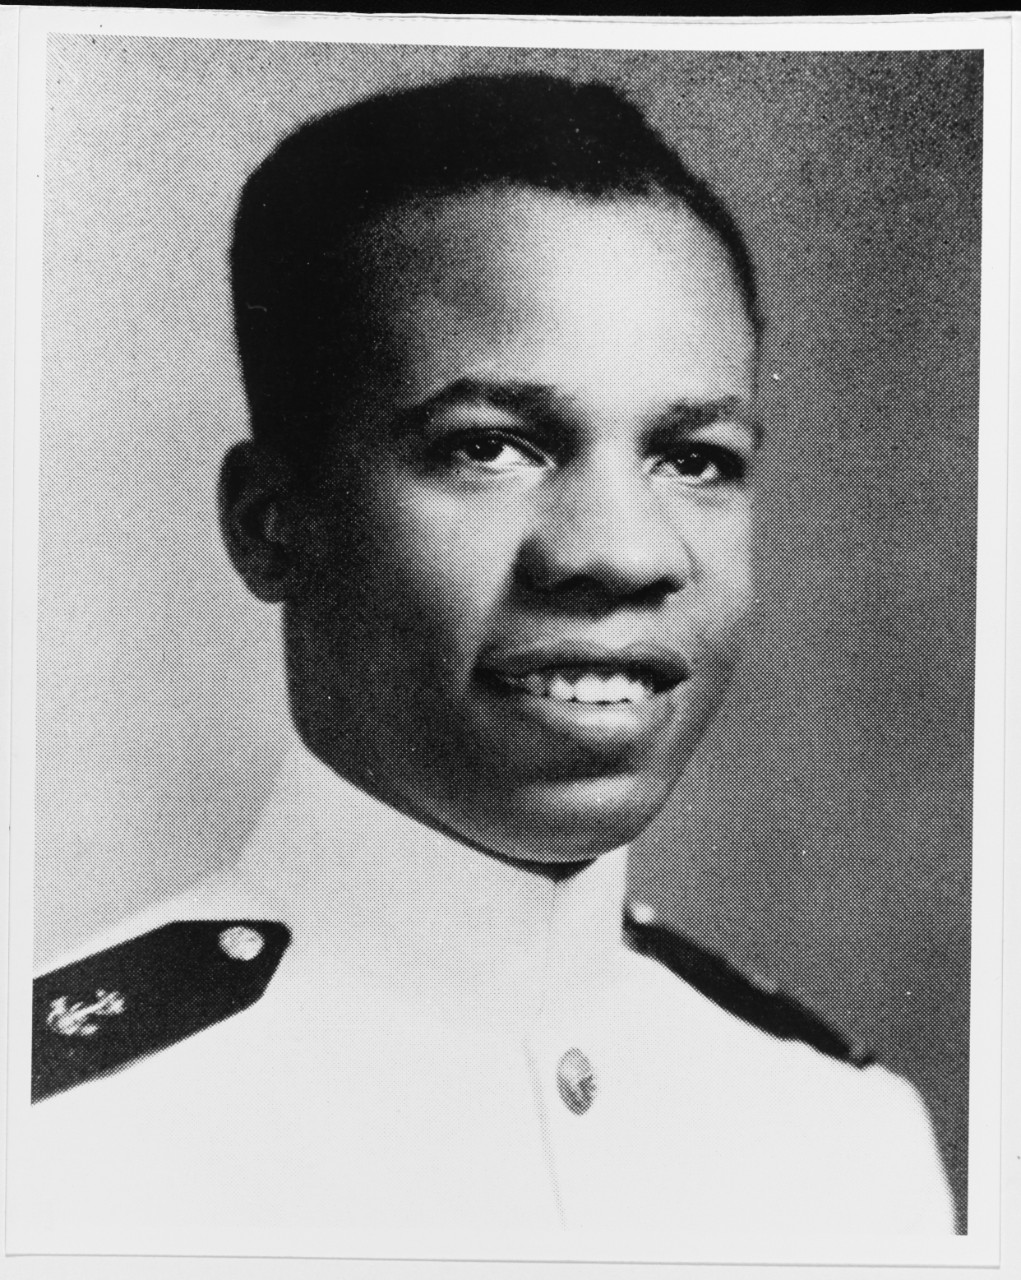 Photo #: NH 91342  Midshipman Wesley A. Brown